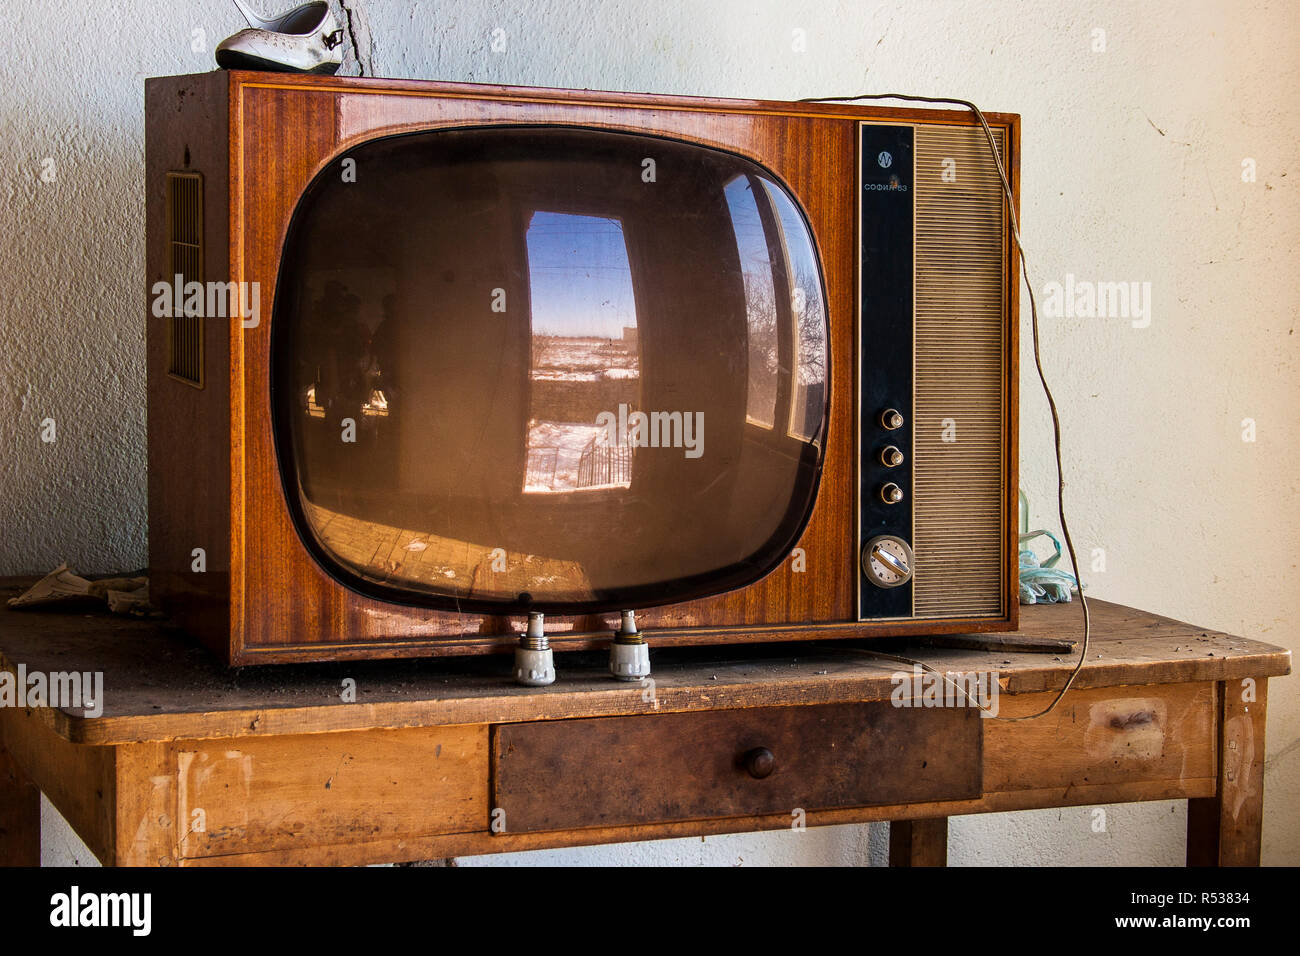 Retro Tv Set High Resolution Stock Photography And Images Alamy